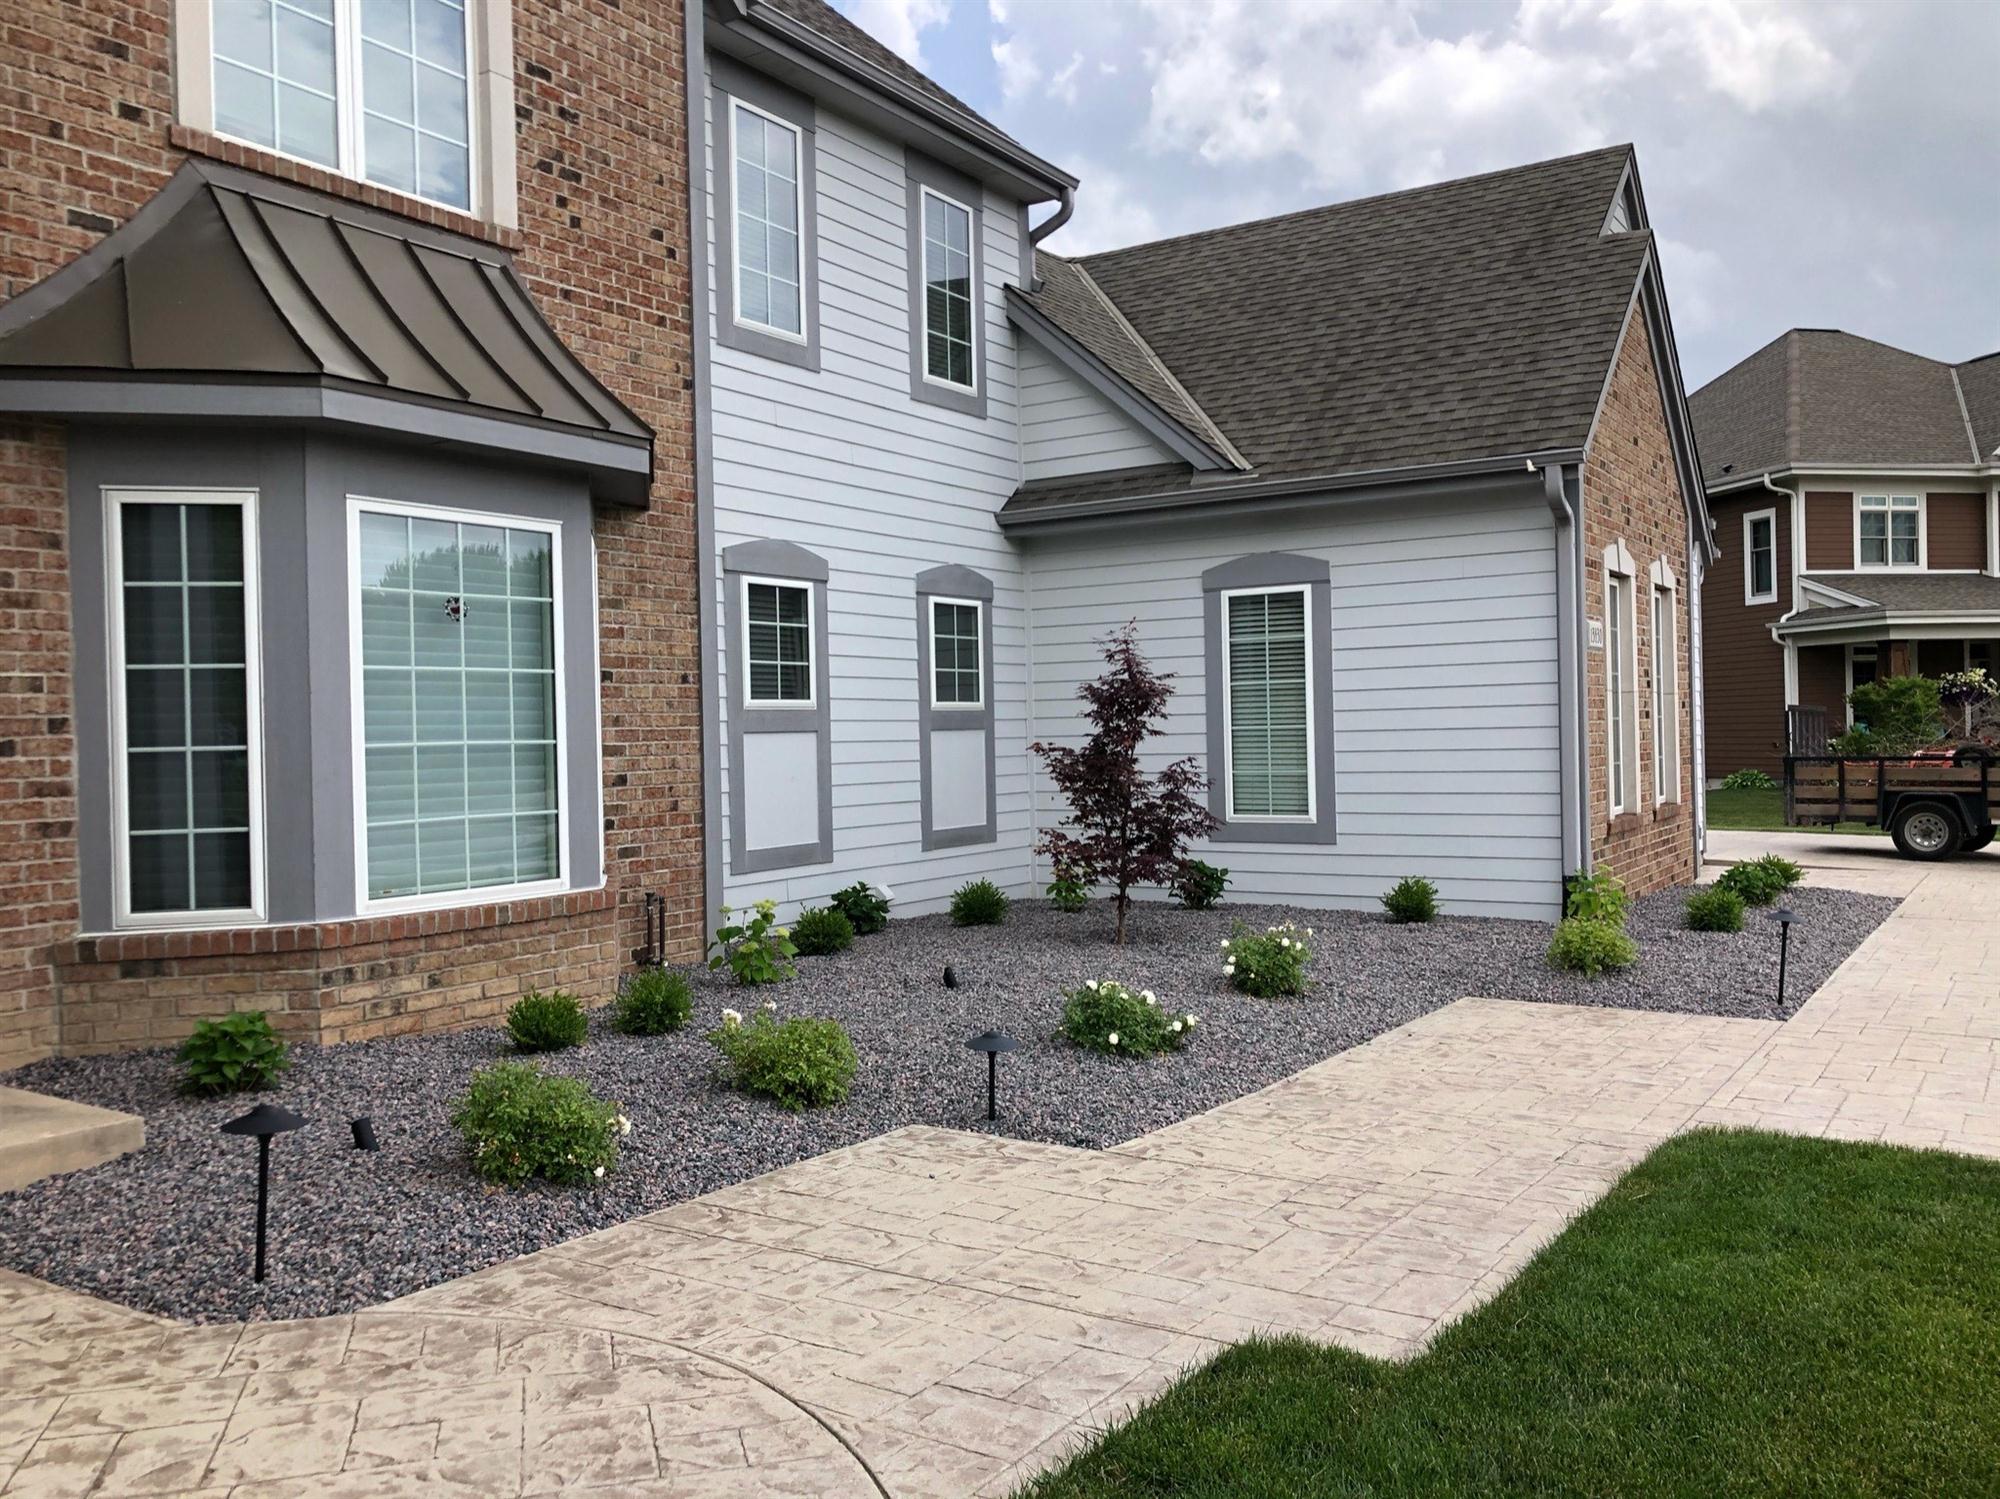 Pea gravel outdoor landscaping with plants